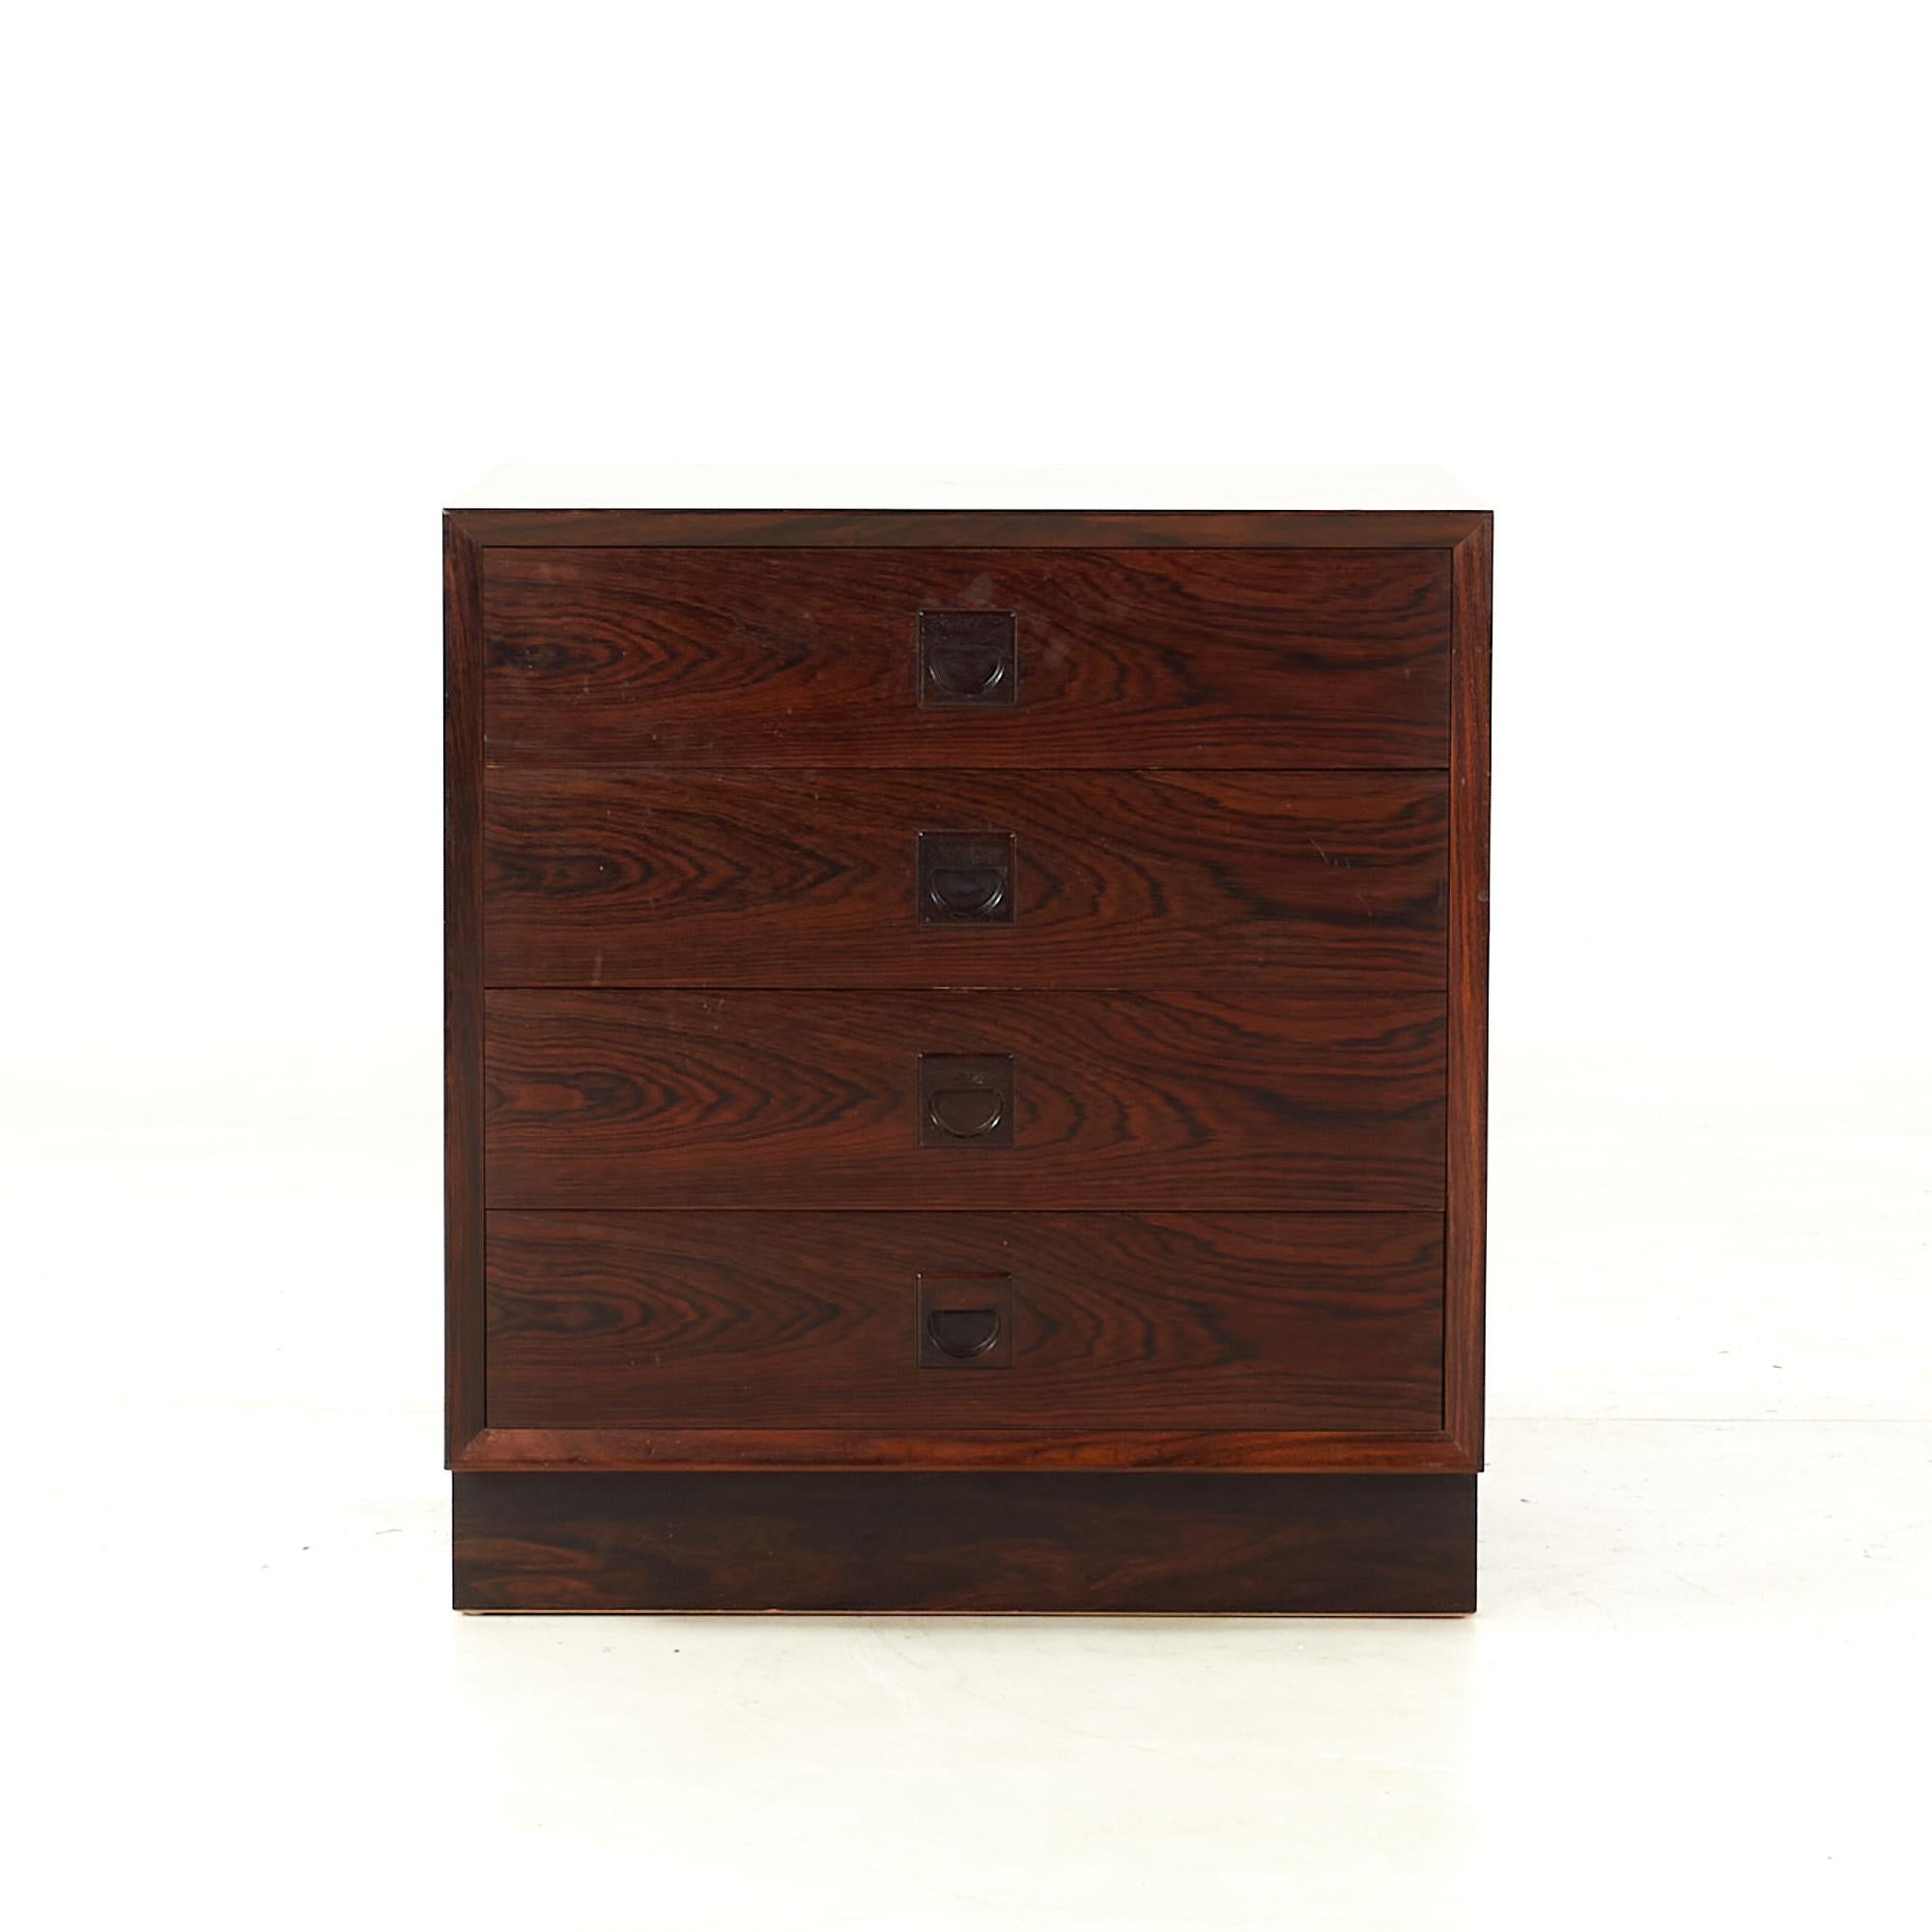 Arne Wahl Iversen style mid-century rosewood nightstand.

This nightstand measures: 20 wide x 19.75 deep x 21.75 inches high.

All pieces of furniture can be had in what we call restored vintage condition. That means the piece is restored upon